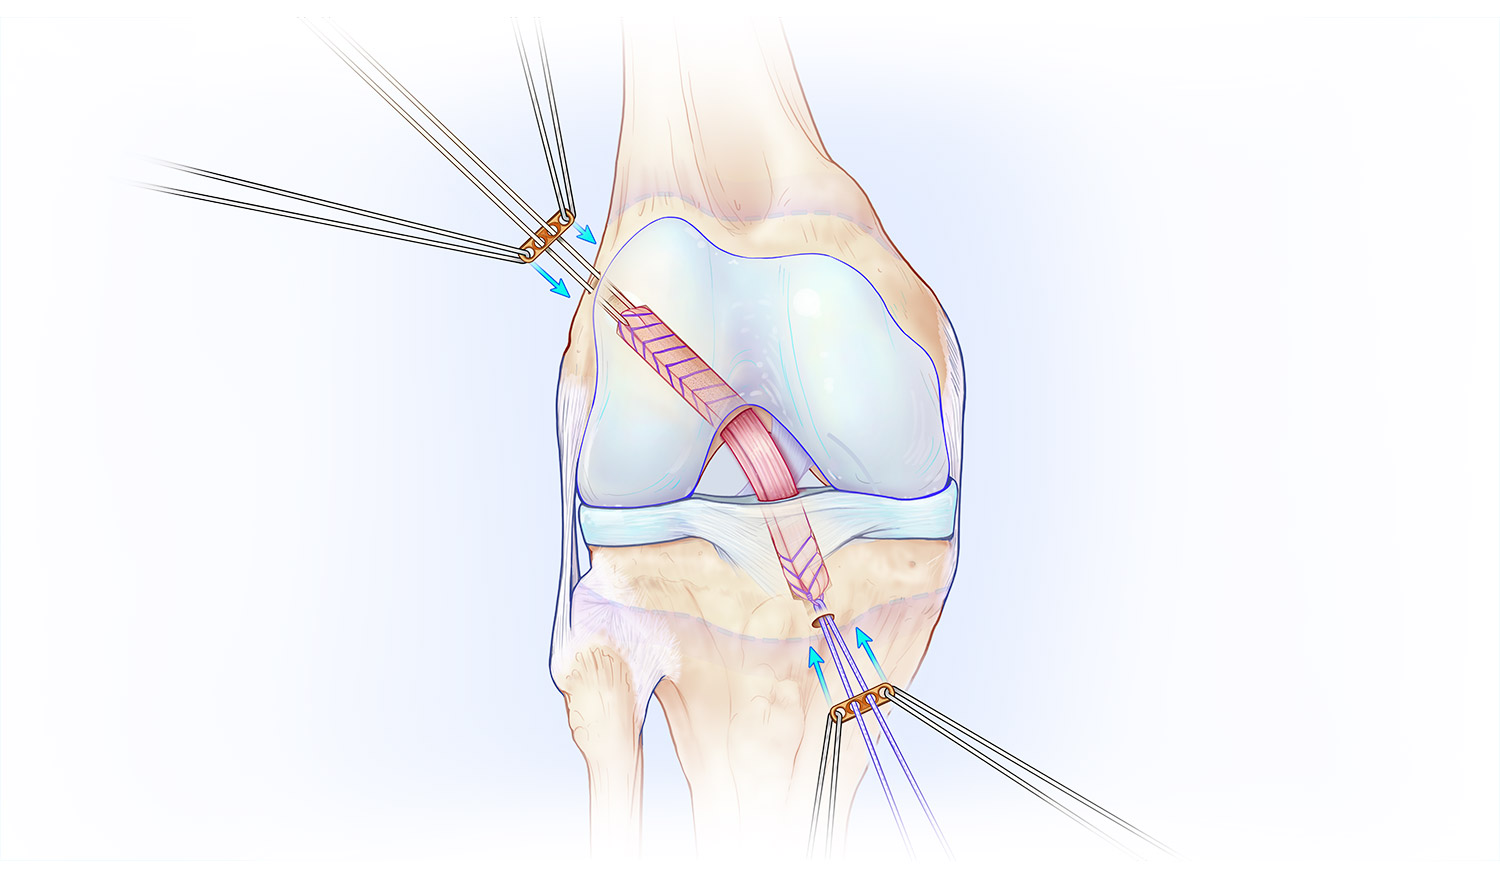 Fig. 2: The replacement tissue graft is passed diagonally through small tunnels in the thigh and shin bones and secured in place.